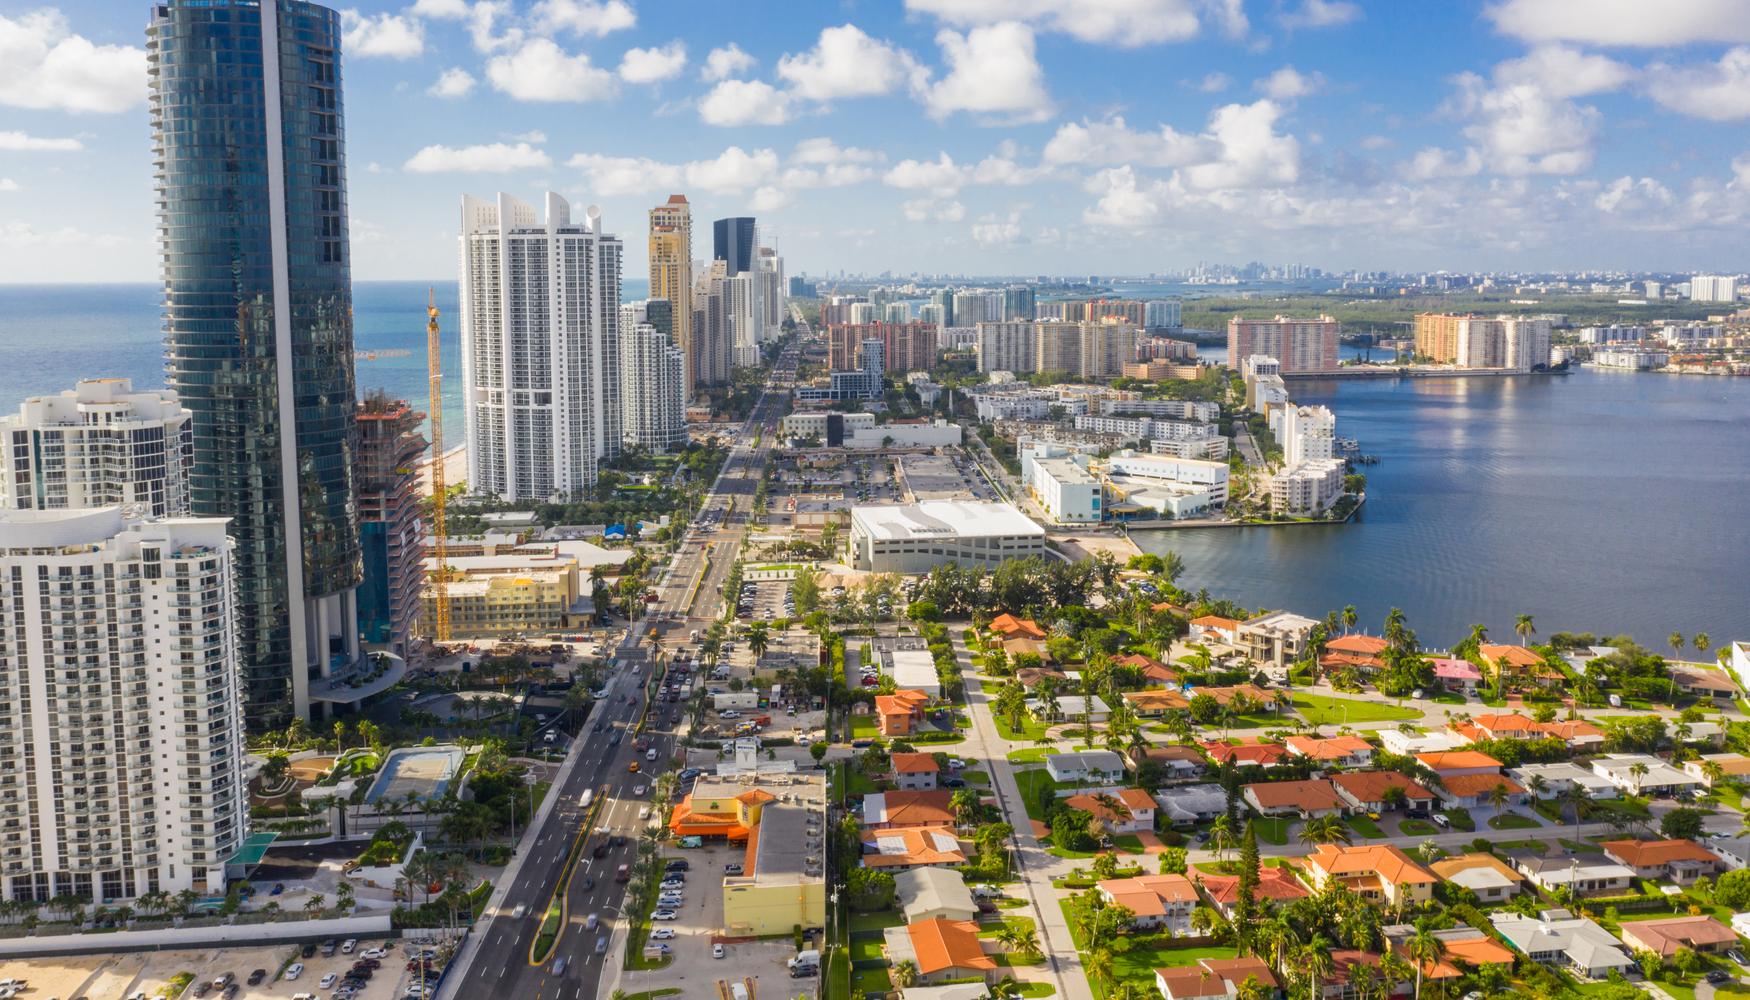 Holidays in Sunny Isles Beach from £1,022 - Search Flight+Hotel on KAYAK